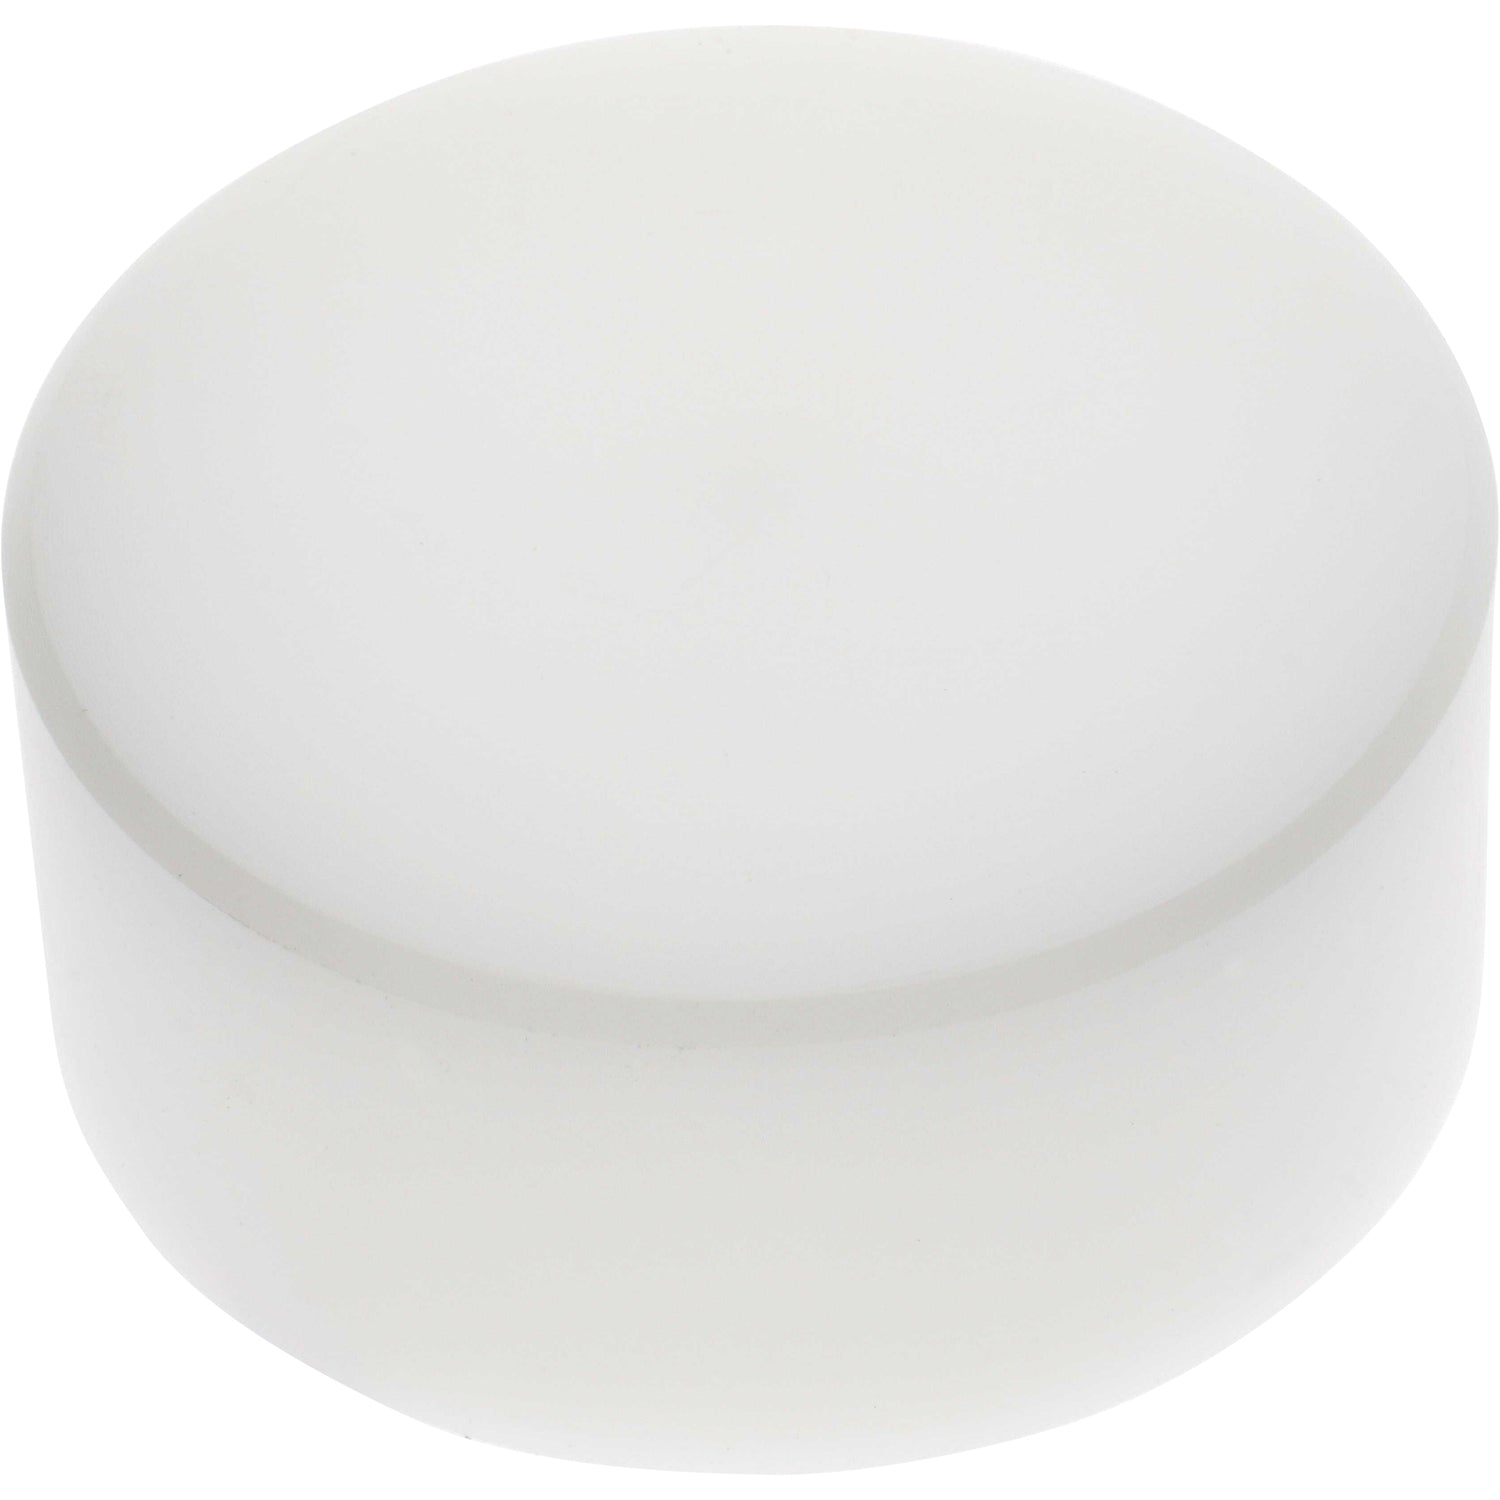 White cylindrical machined part made of Delrin plastic, shaped like a puck on white background